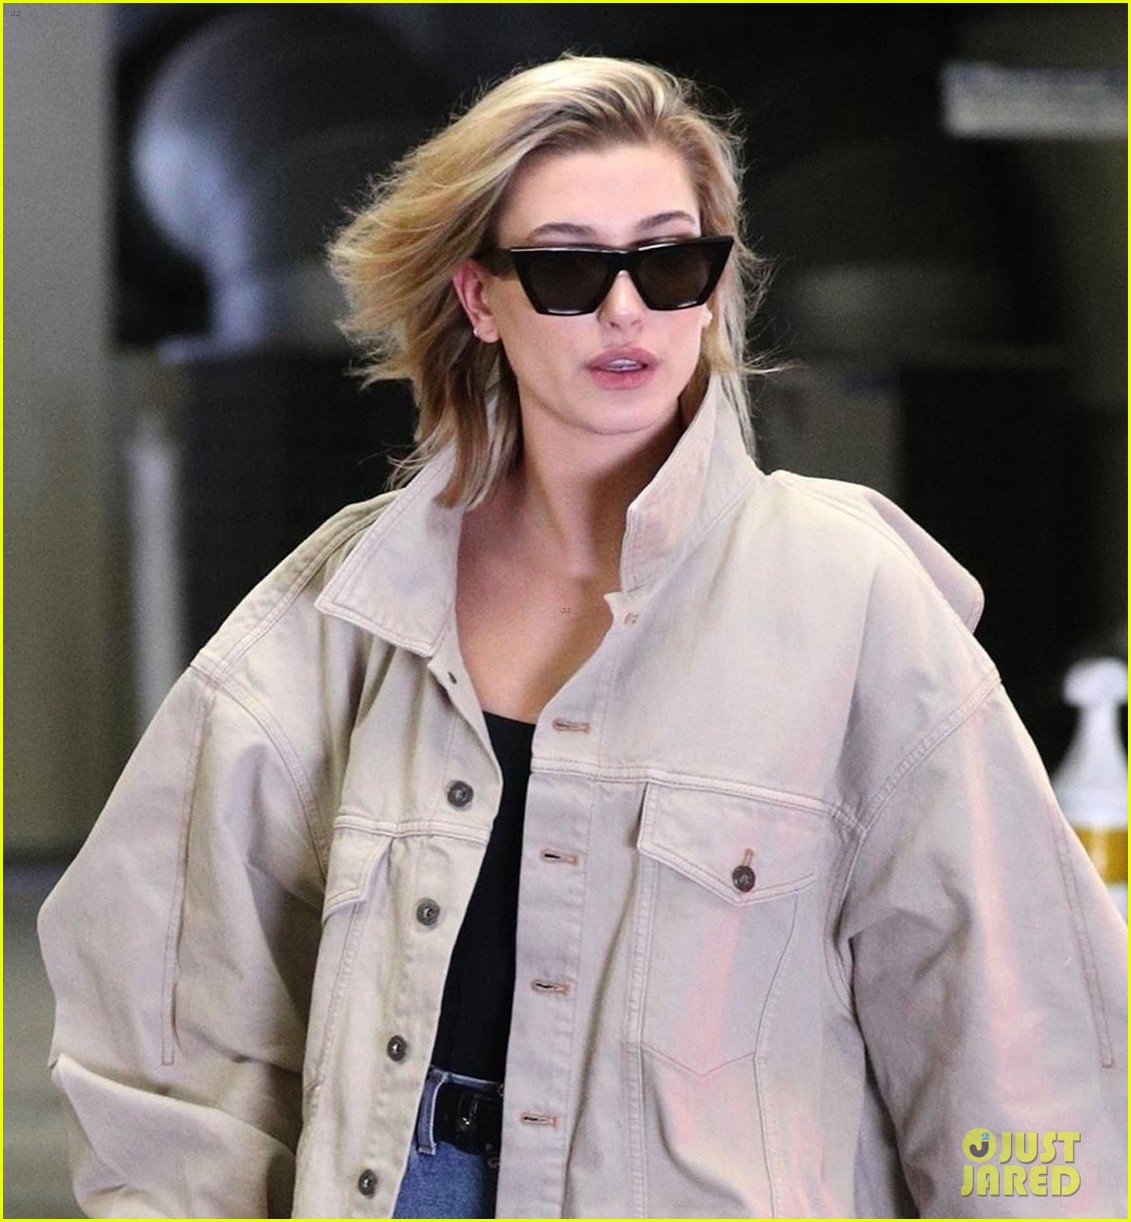 hailey baldwin shows off her casual street style in oversized jacket 02